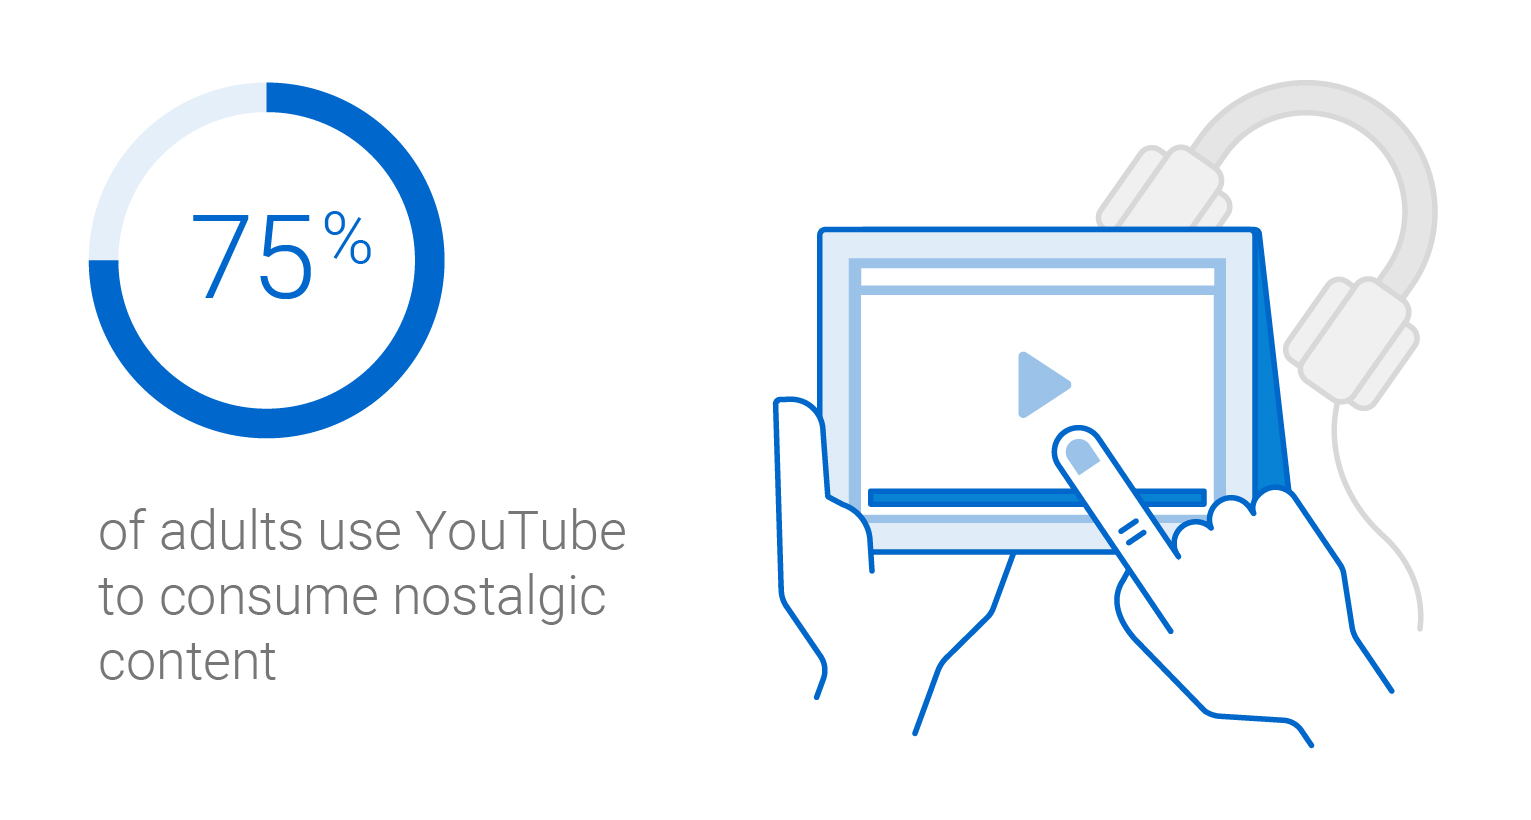 Infographic. 75 per cent of adults use YouTube to consume nostalgic content.